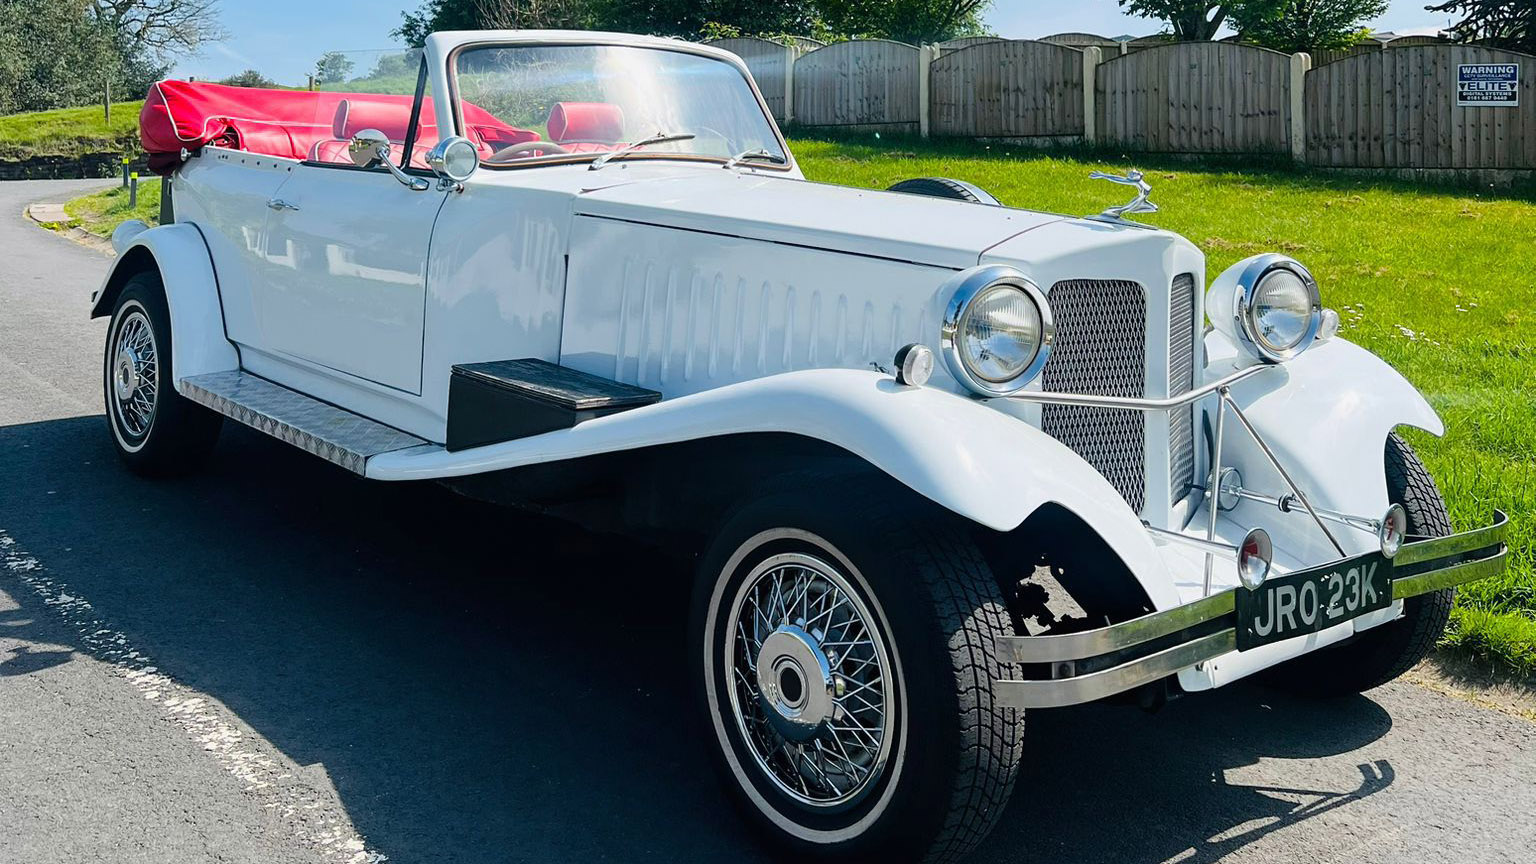 Right side view of White BEauford Convertible with roof down